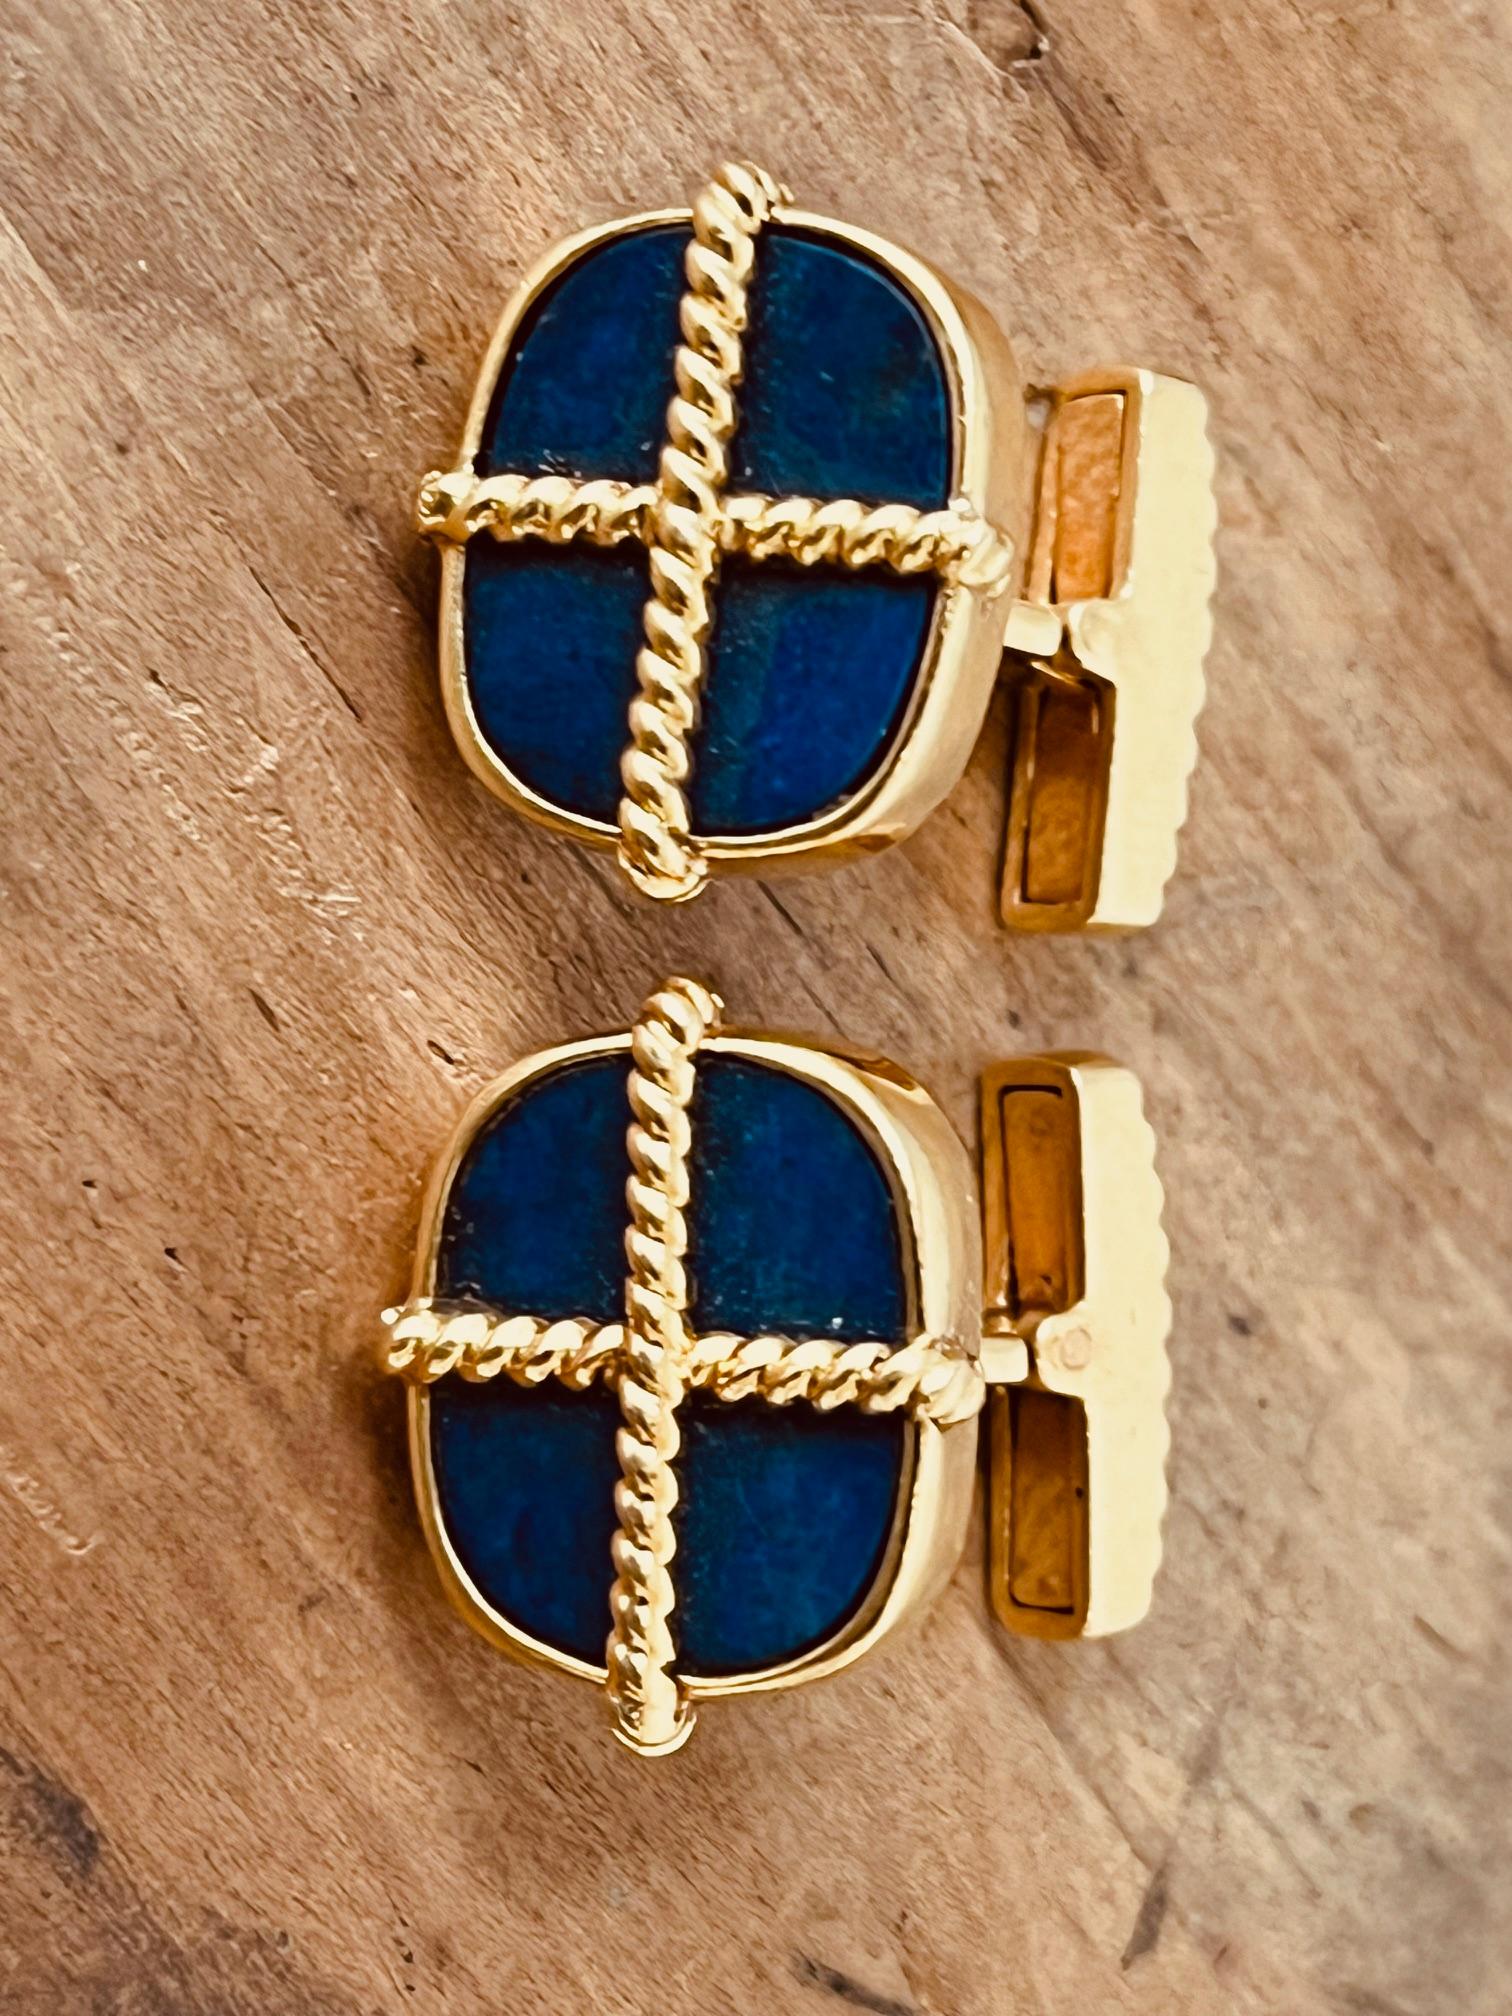 A pair of 18ct yellow gold and Lapis Lazuli cufflinks. Circa 1970's. Weight: 17.4g. Price: 4,150£. Item is in very good condition without any damage. Return policy within 3 days is applied. Please make sure you watch the short video that gives real